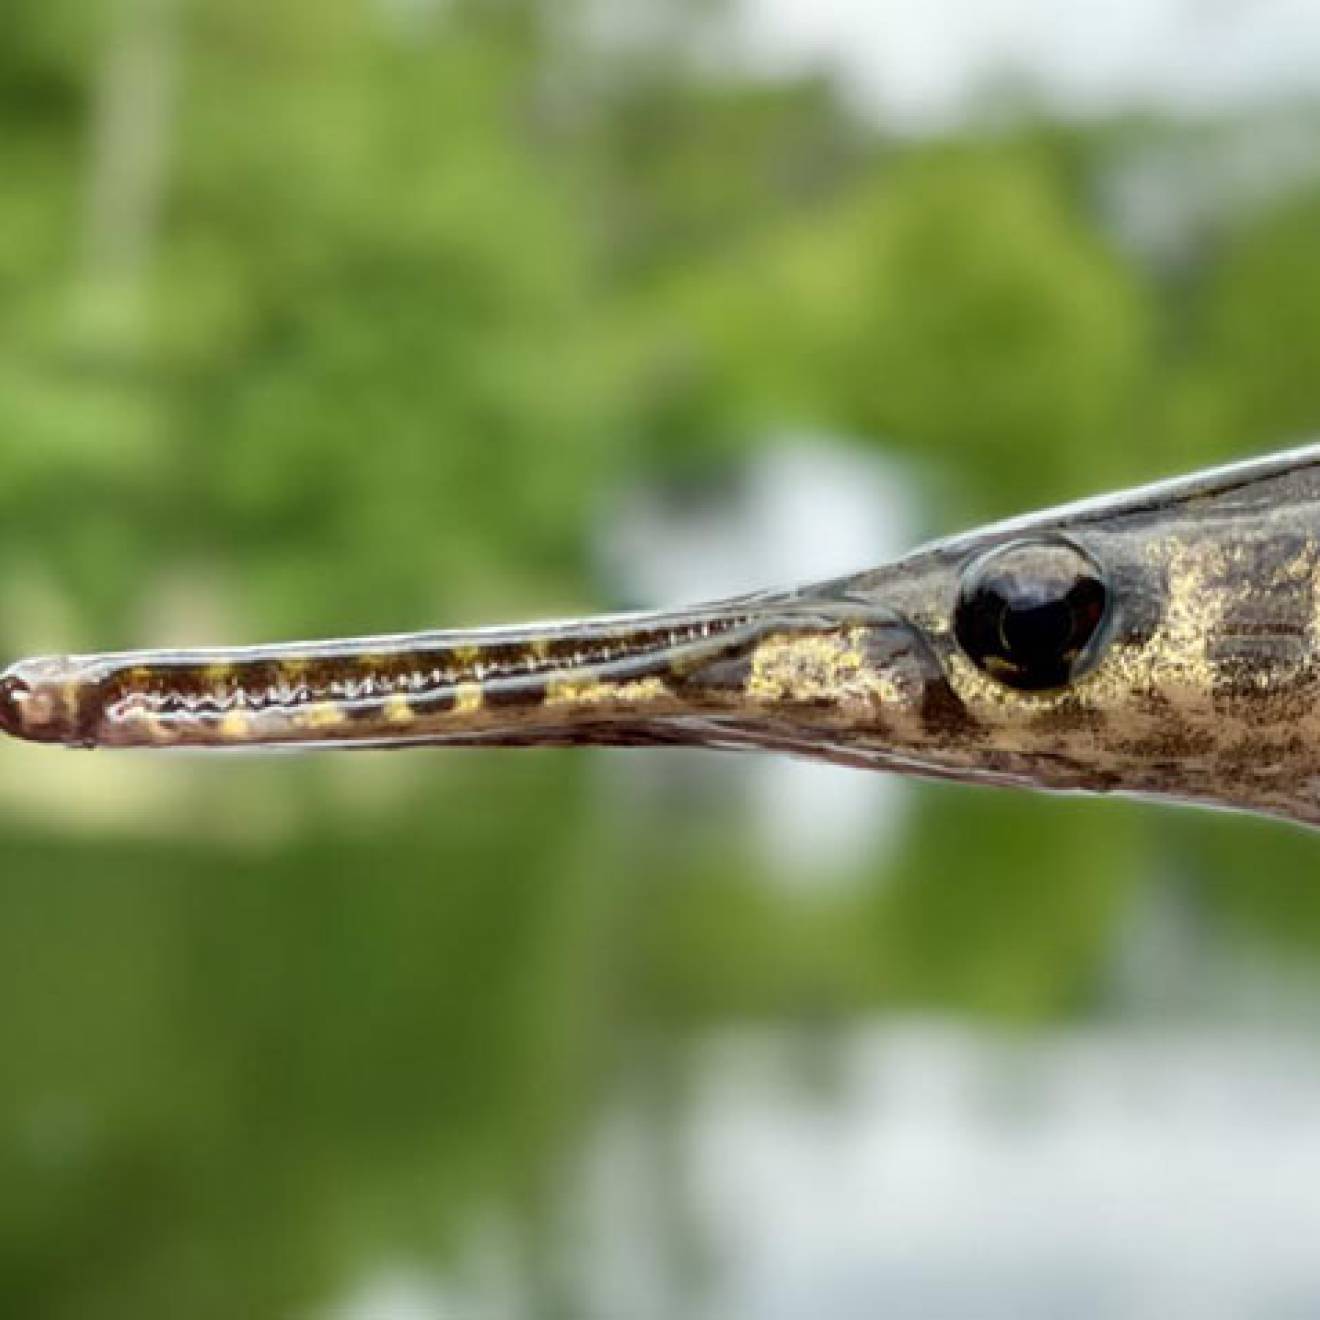 Spotted Gar, an ancient and native fish species